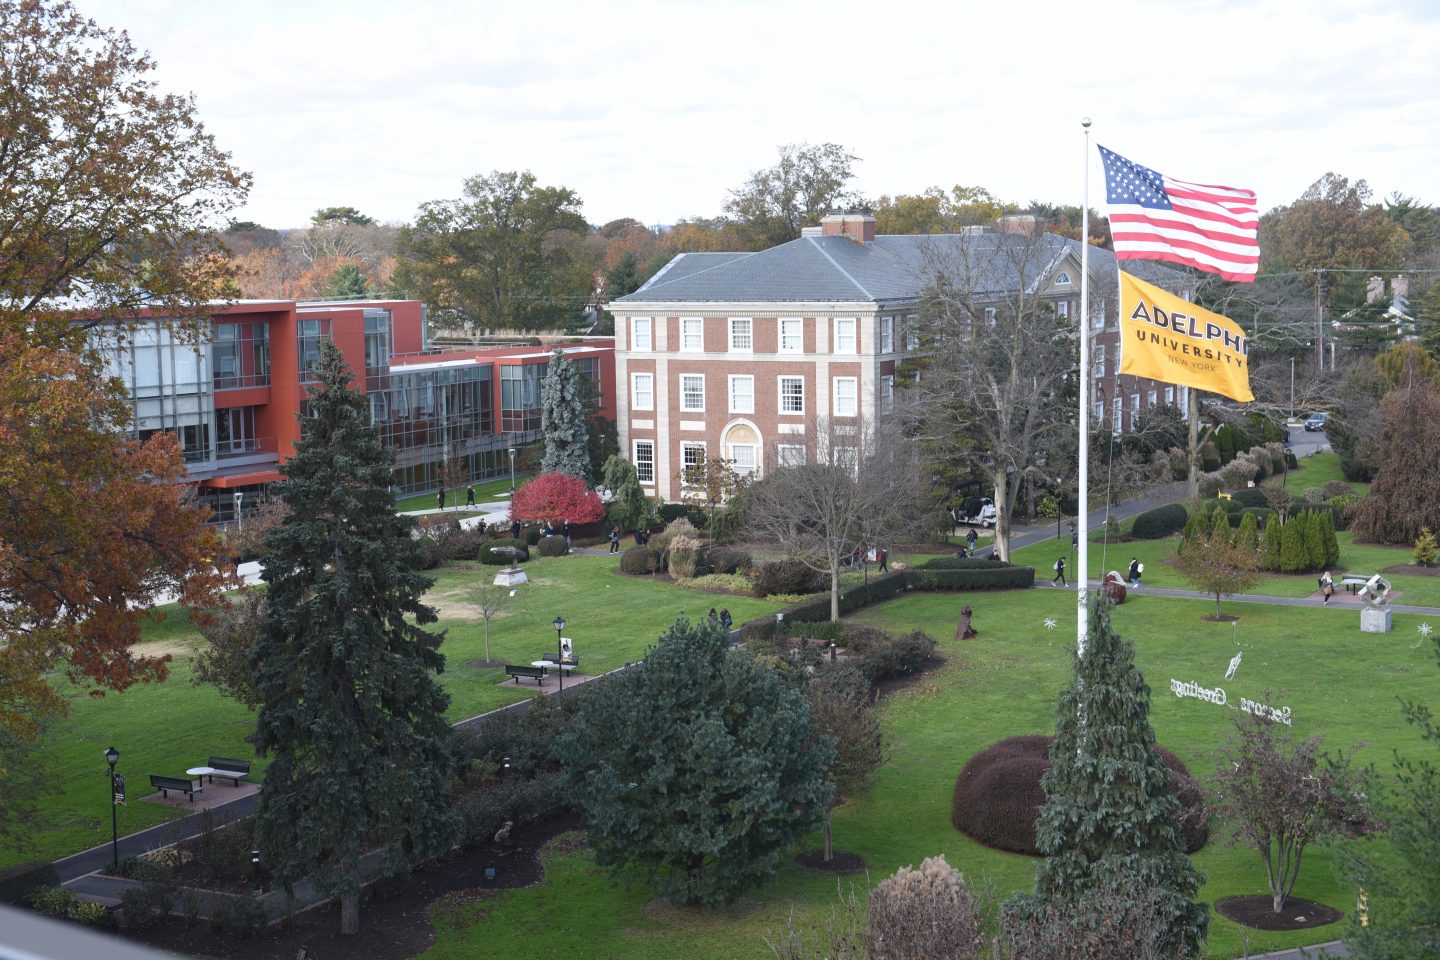 Aerial view of Adelphi University, Garden City campus - Showing Nexus Building, Levermore Hall and the Flagpole lawn with both American and Adelphi flags waving.